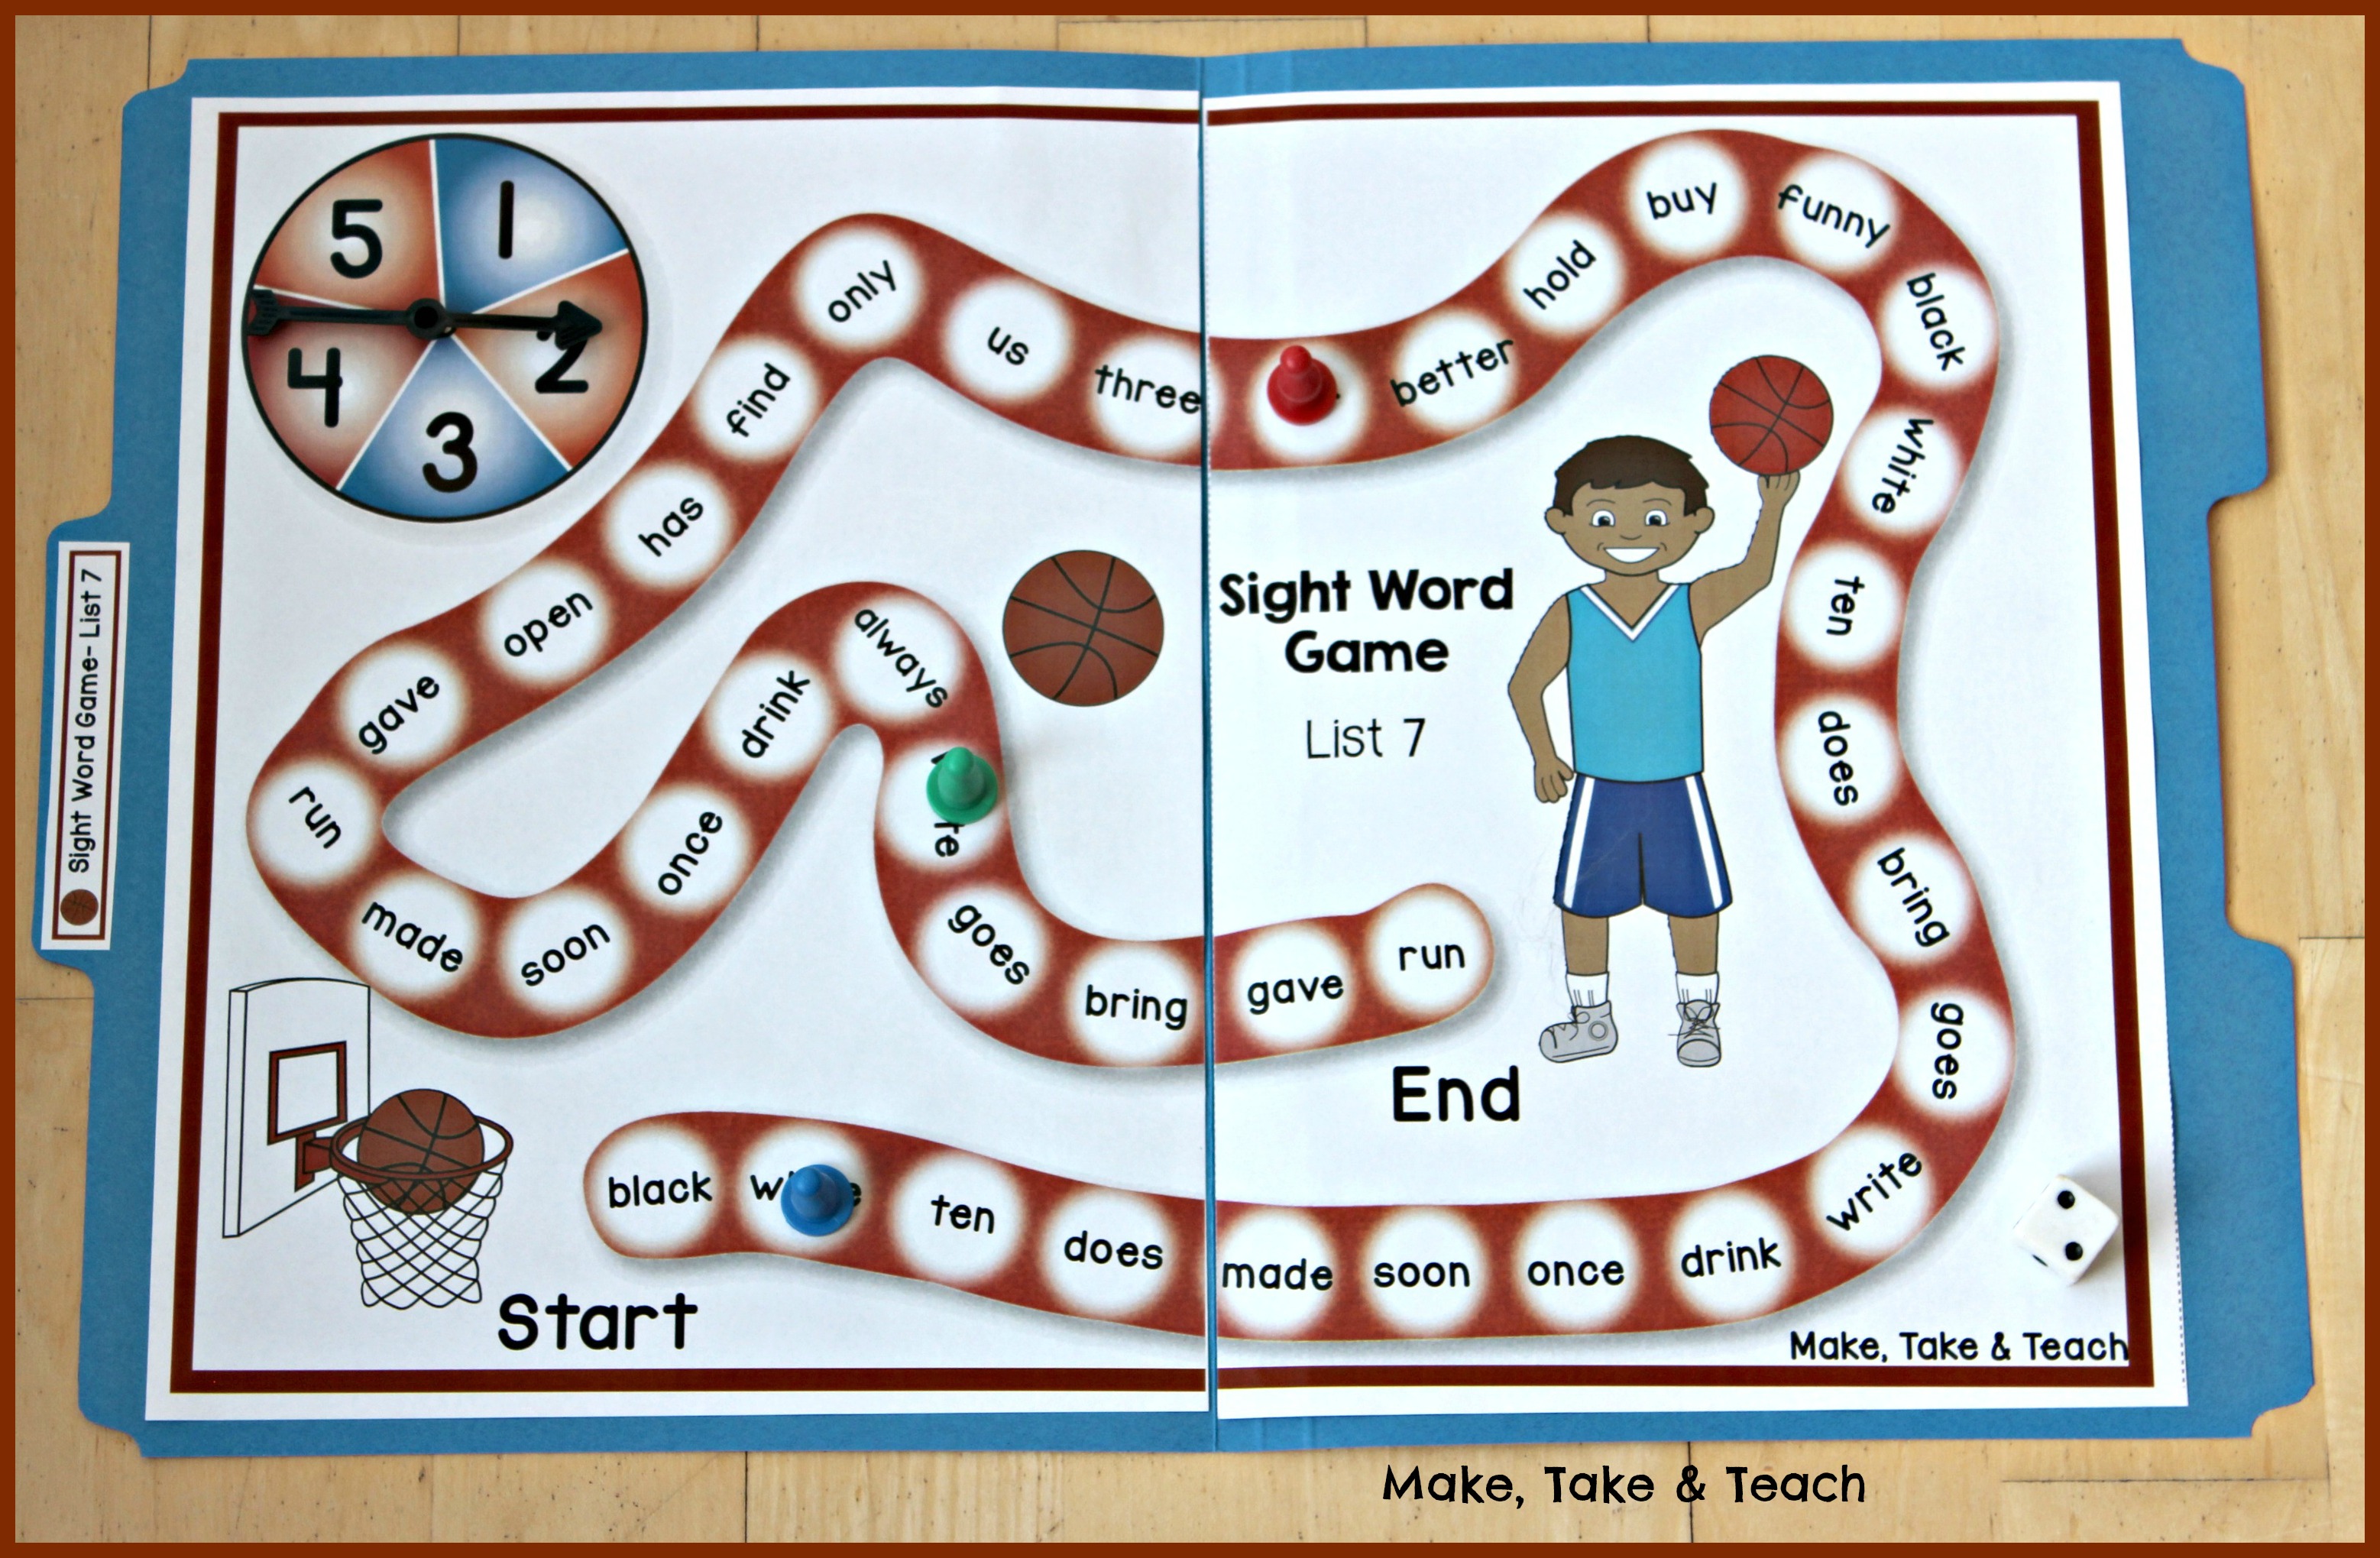 Game on 6 класс. Sight Words game. Игра Word. Sight Words games for Kids. Sight Words Board game.